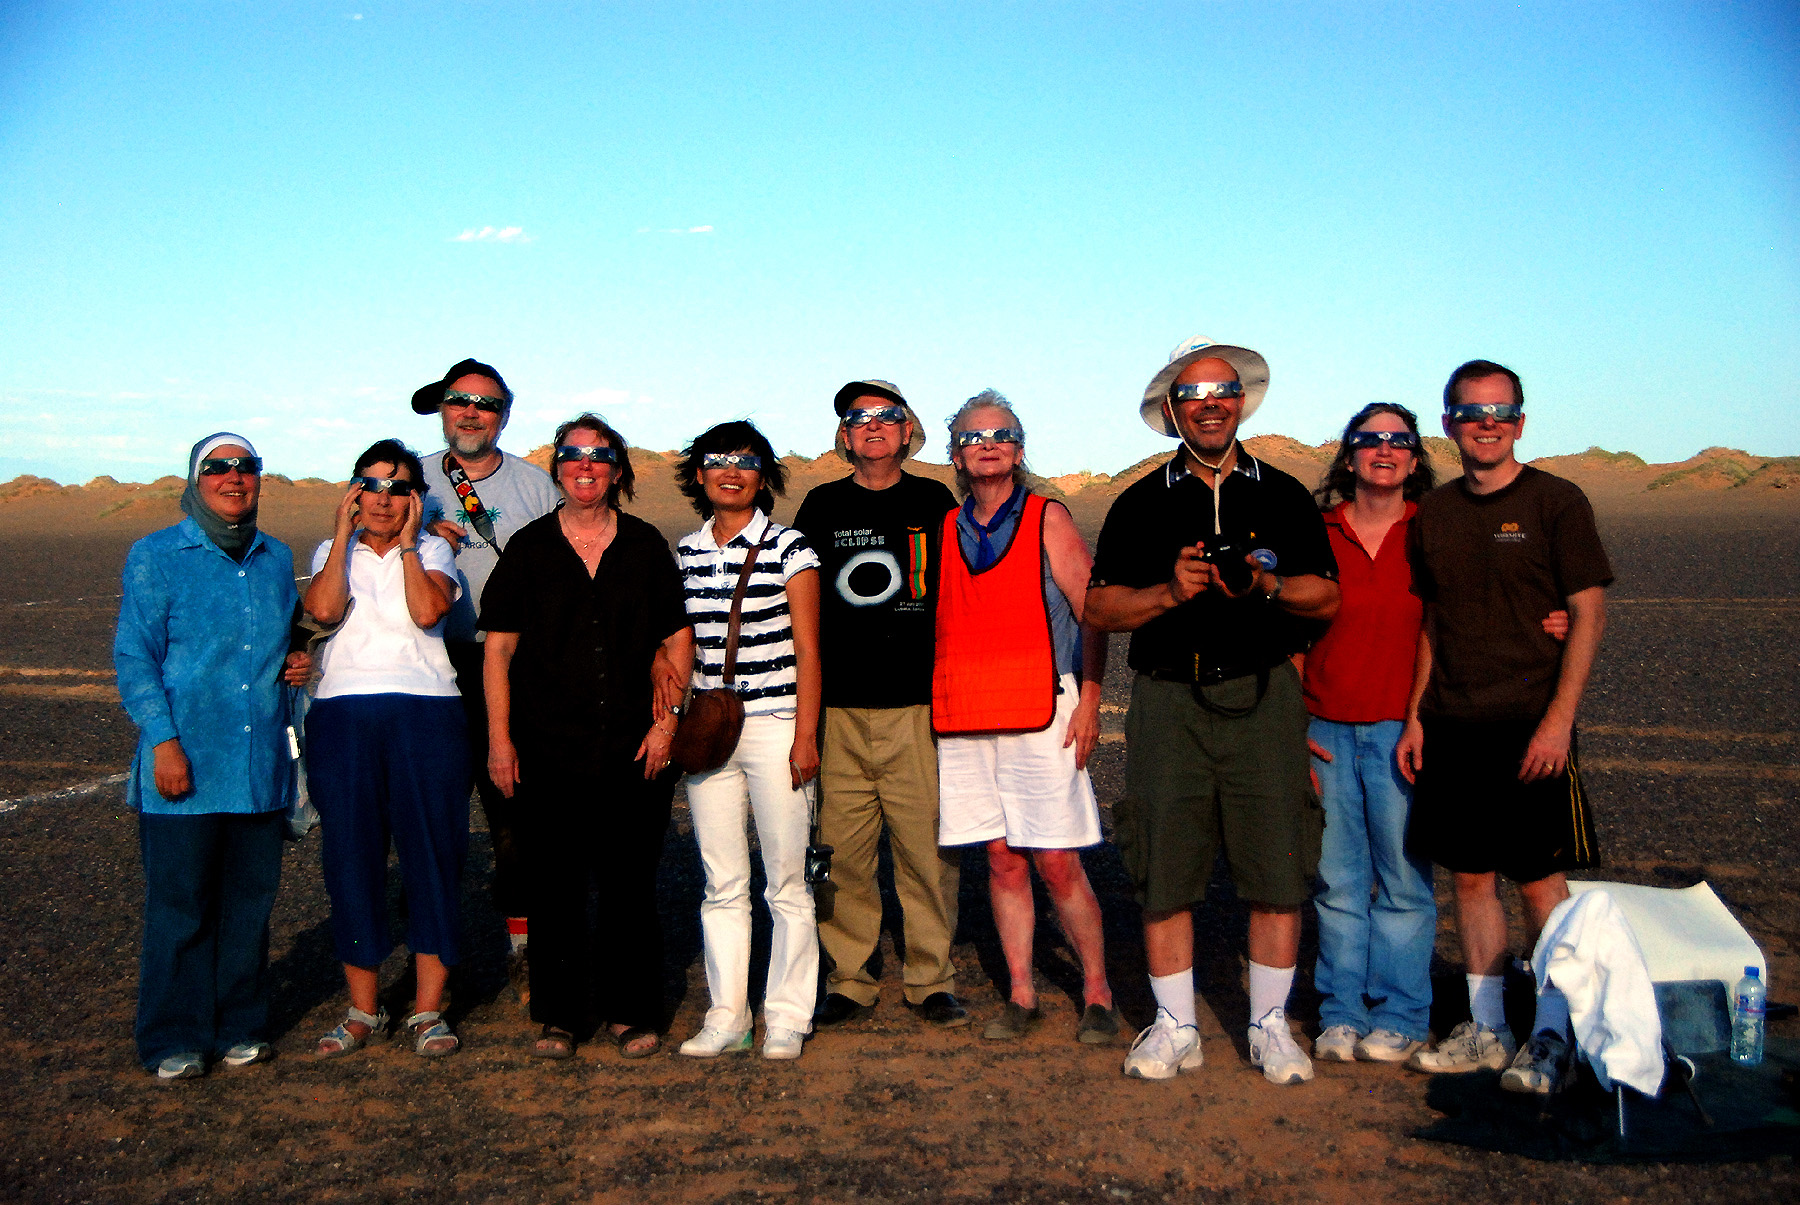 Eclipse-Group Viewing just at Totality - 2643.JPG